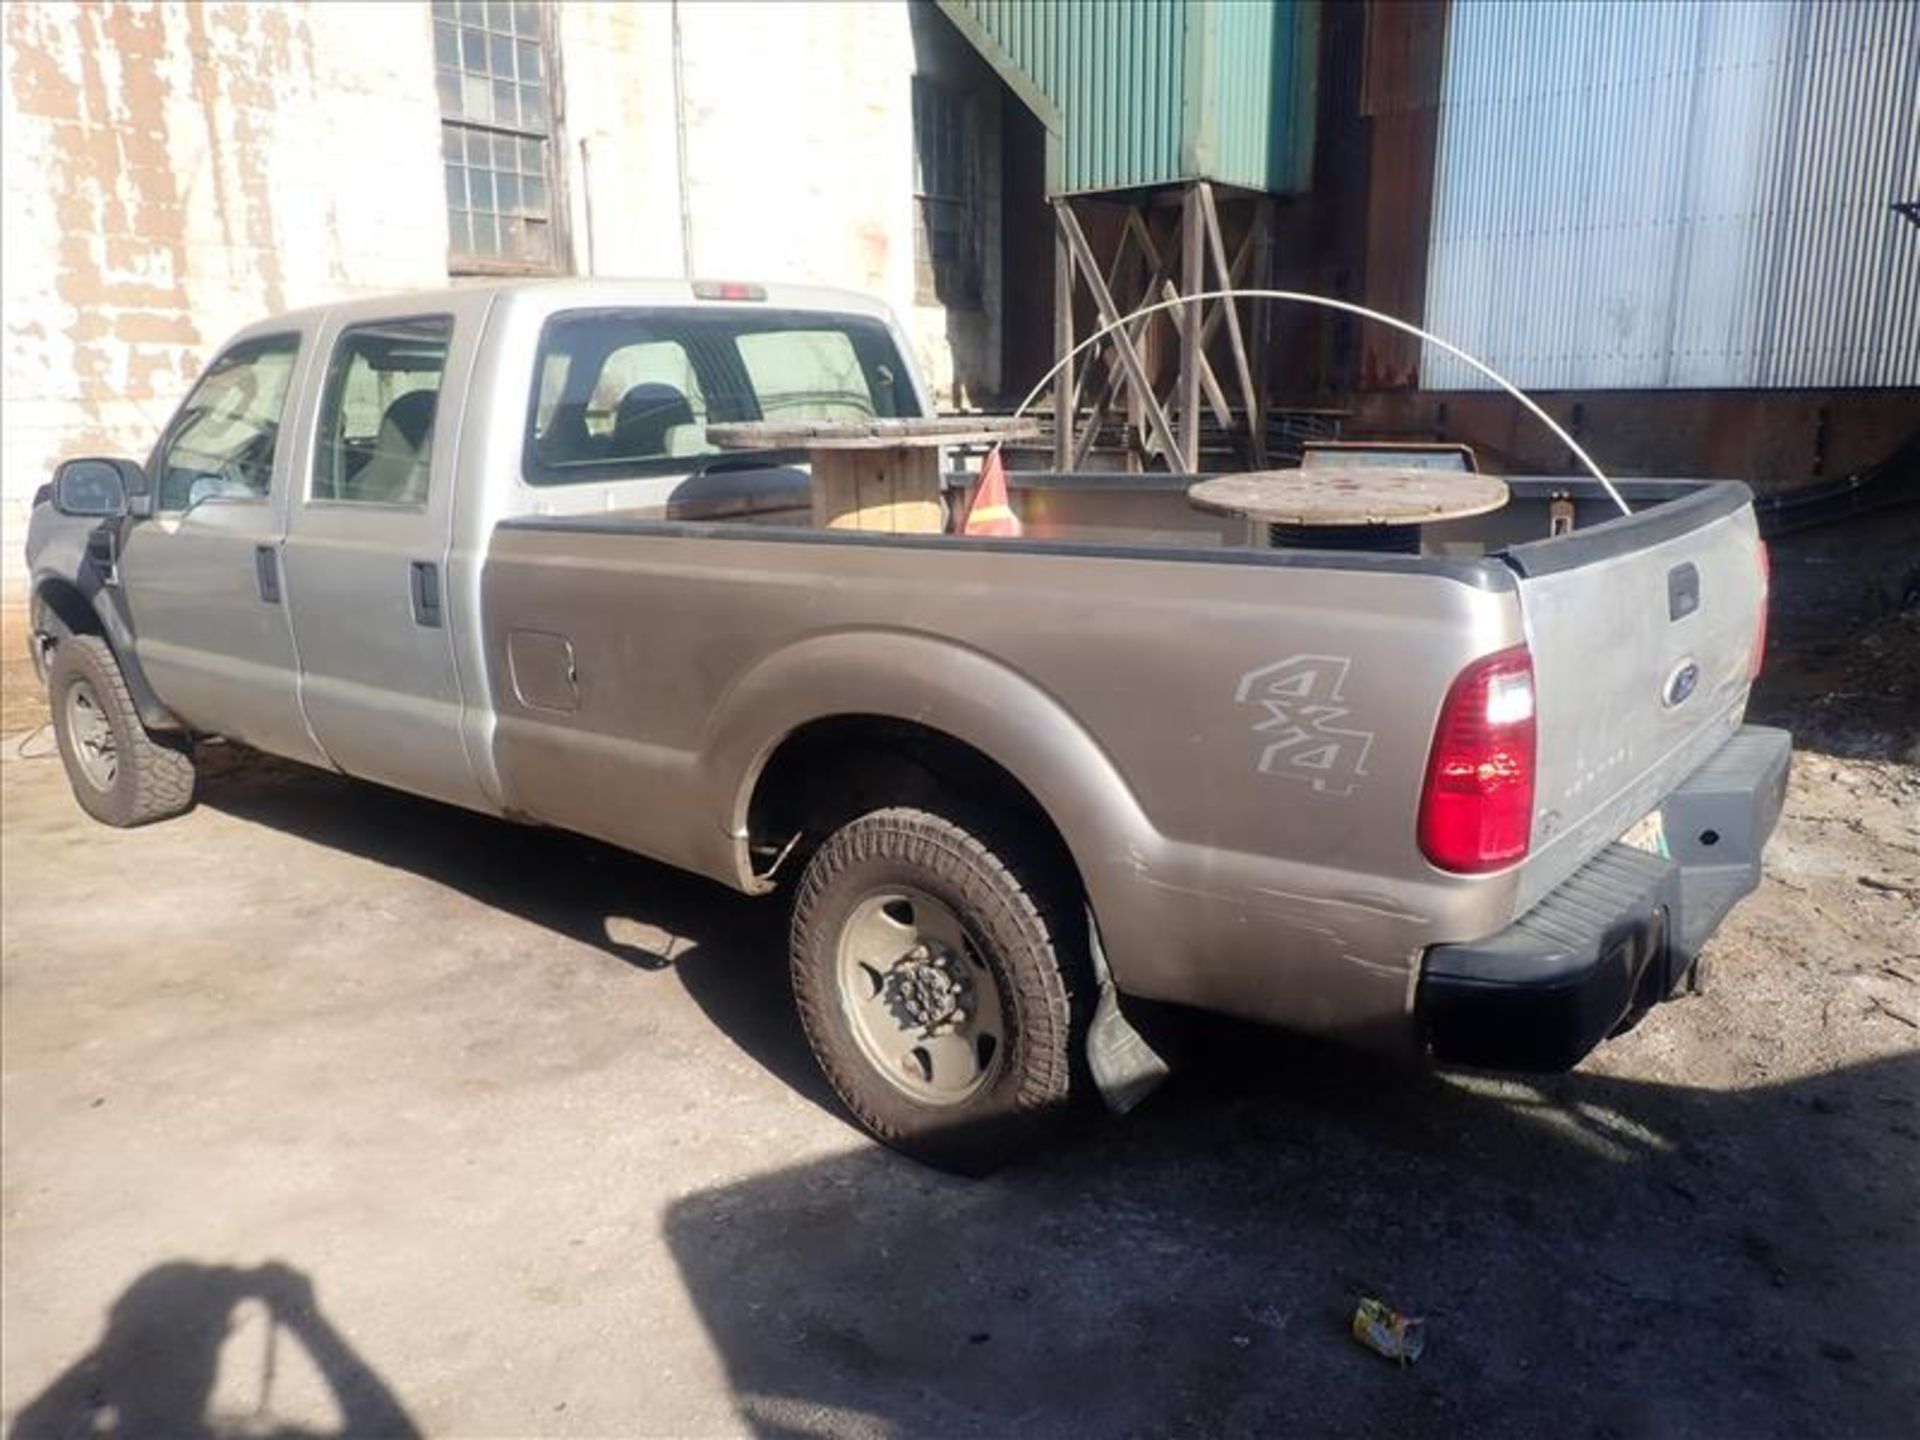 2008 Ford F250 XL SuperDuty pick-up truck, VIN 1FTSW21528EB74521, approx. 103000 km, crew-cab, - Image 2 of 9